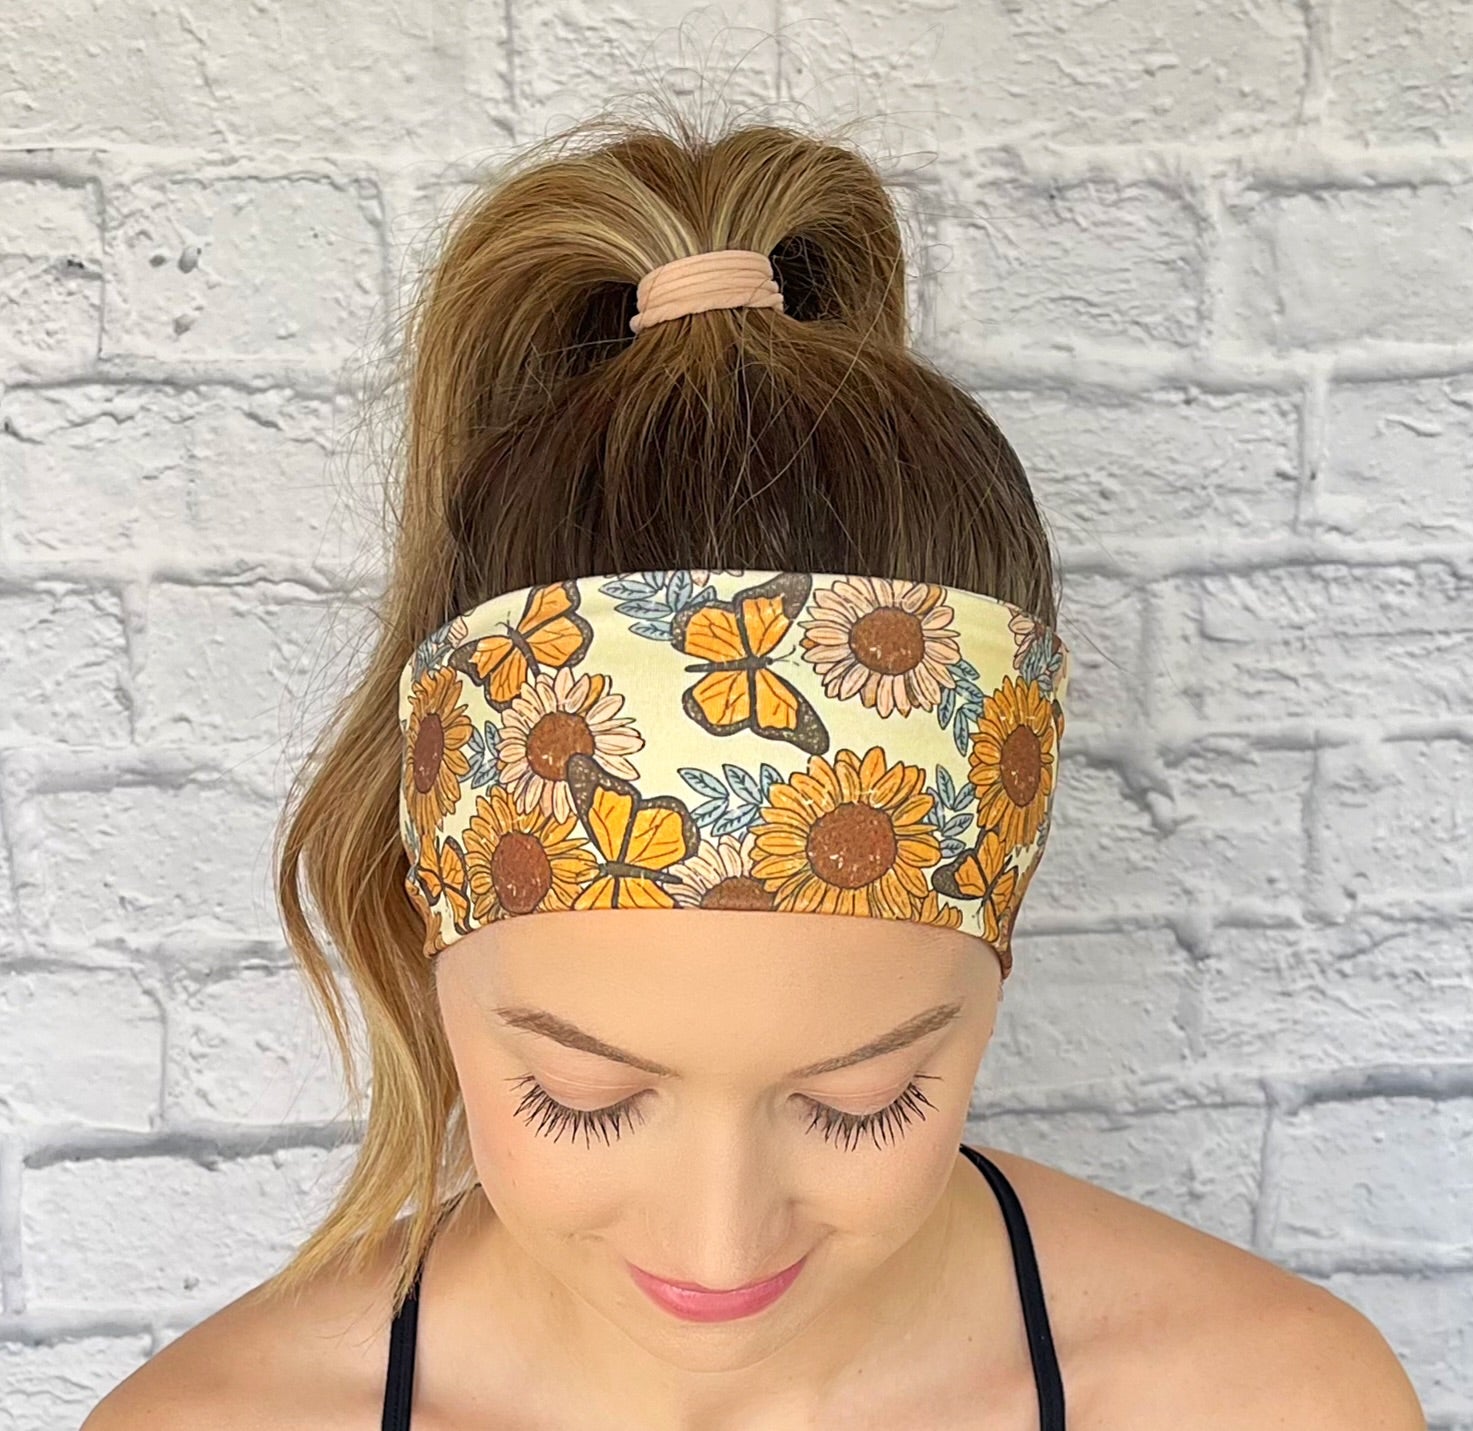 yelllow/tan headband with sunflowers and monarch butterflies